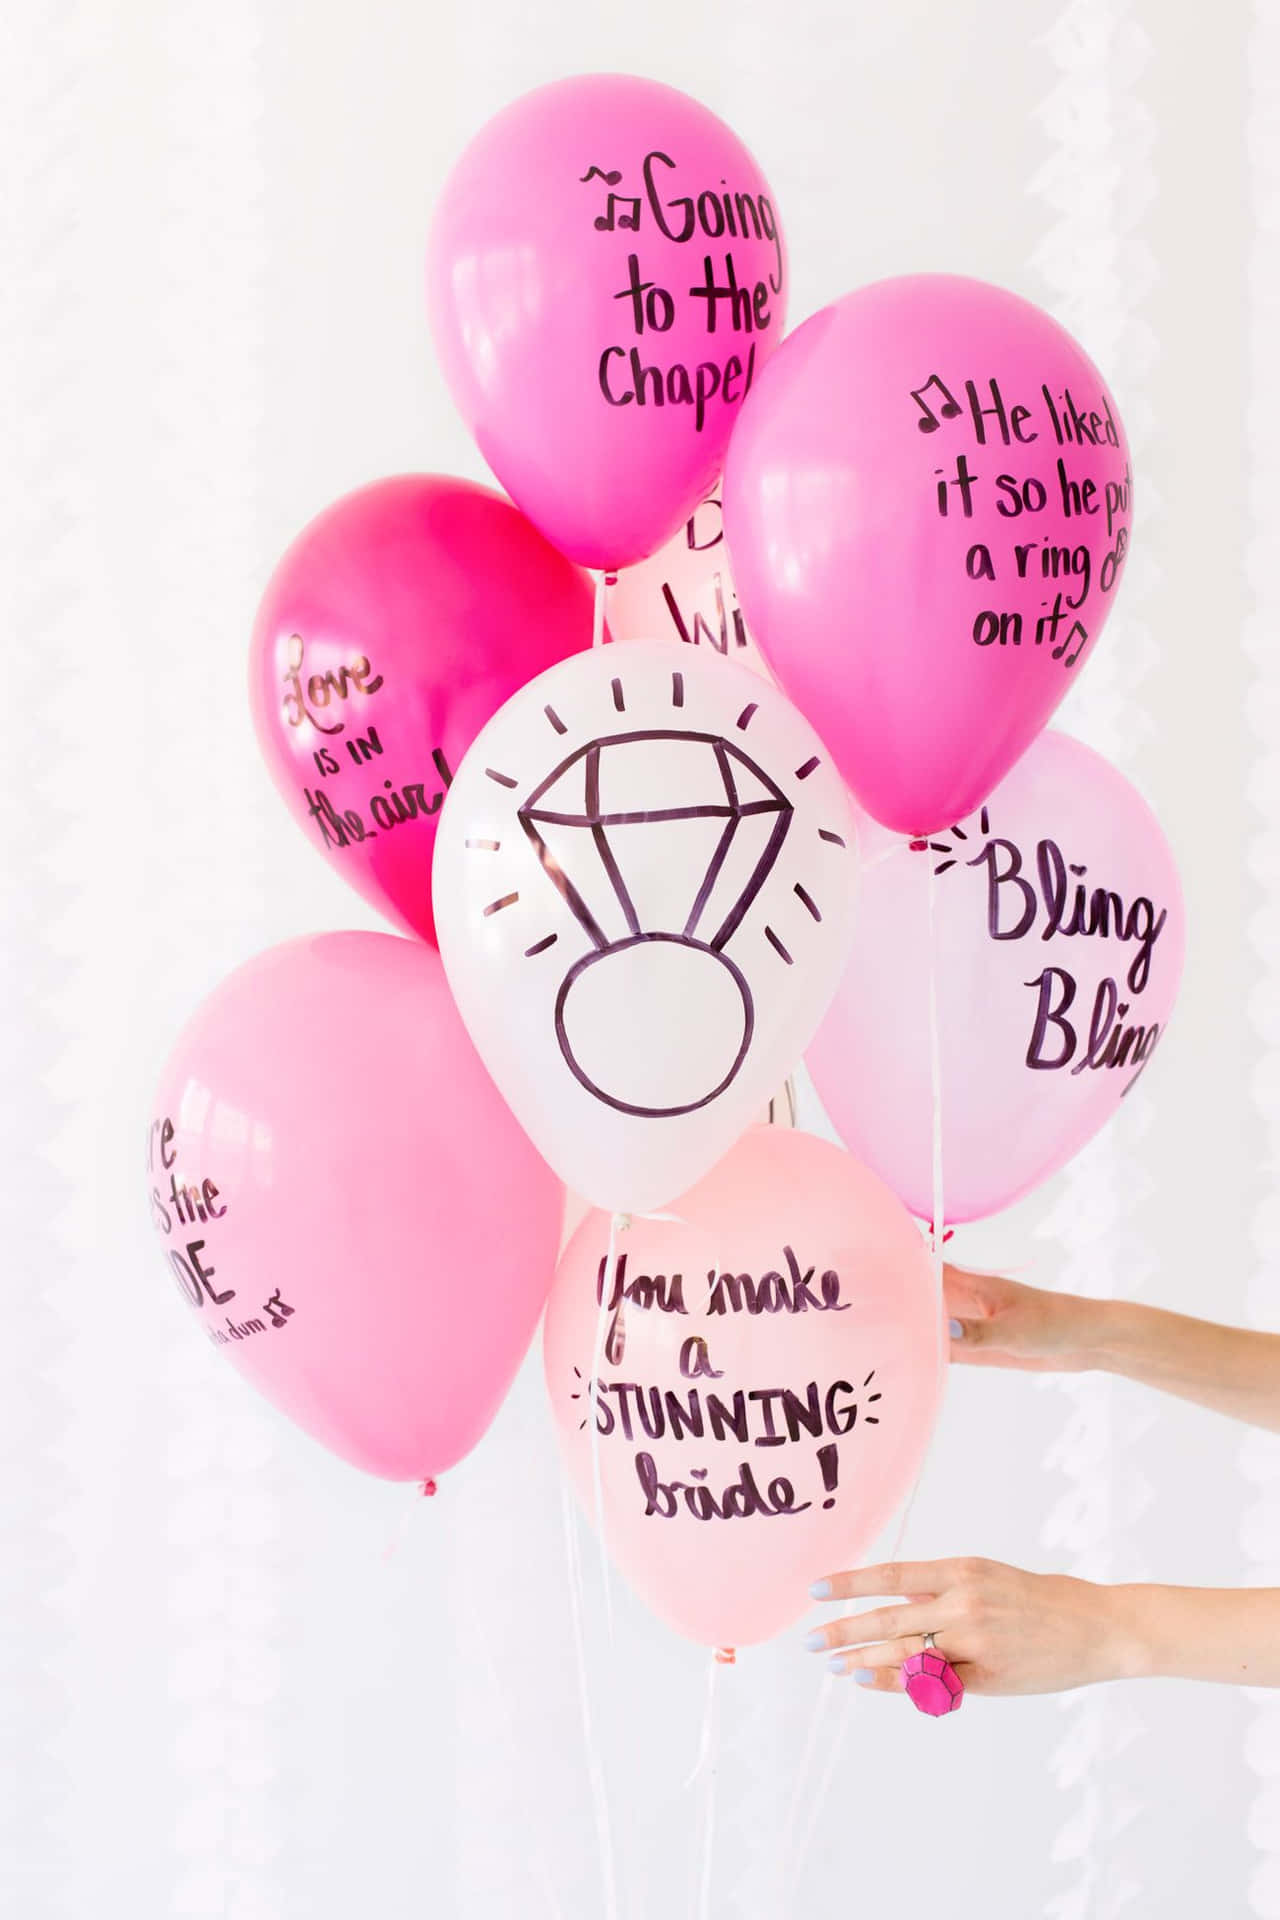 A Person Holding Pink Balloons With Writing On Them